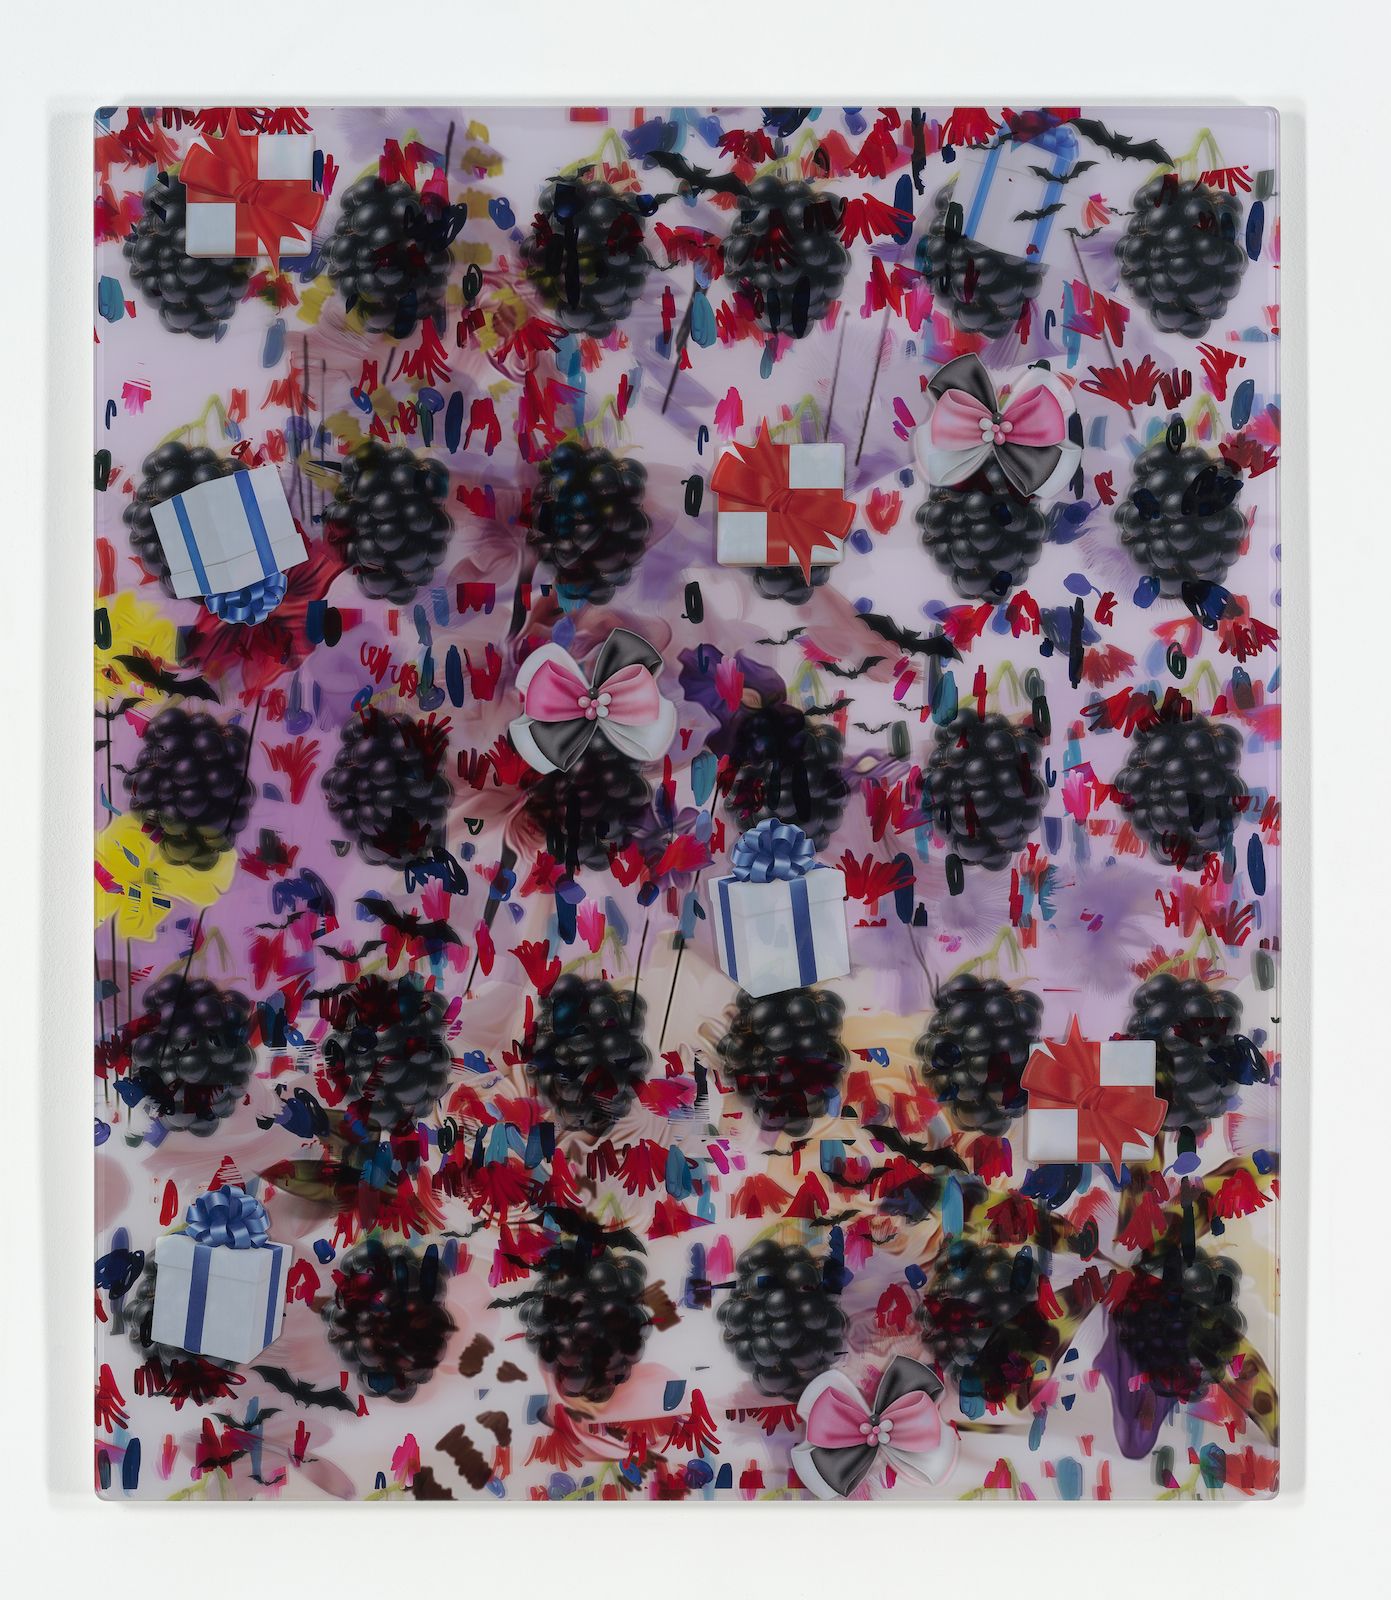 Petra Cortright, *chess*, 2015, Digital painting, duraflex, 3D print, UV print, mounted on acrylic 49 × 42 × 1 in.